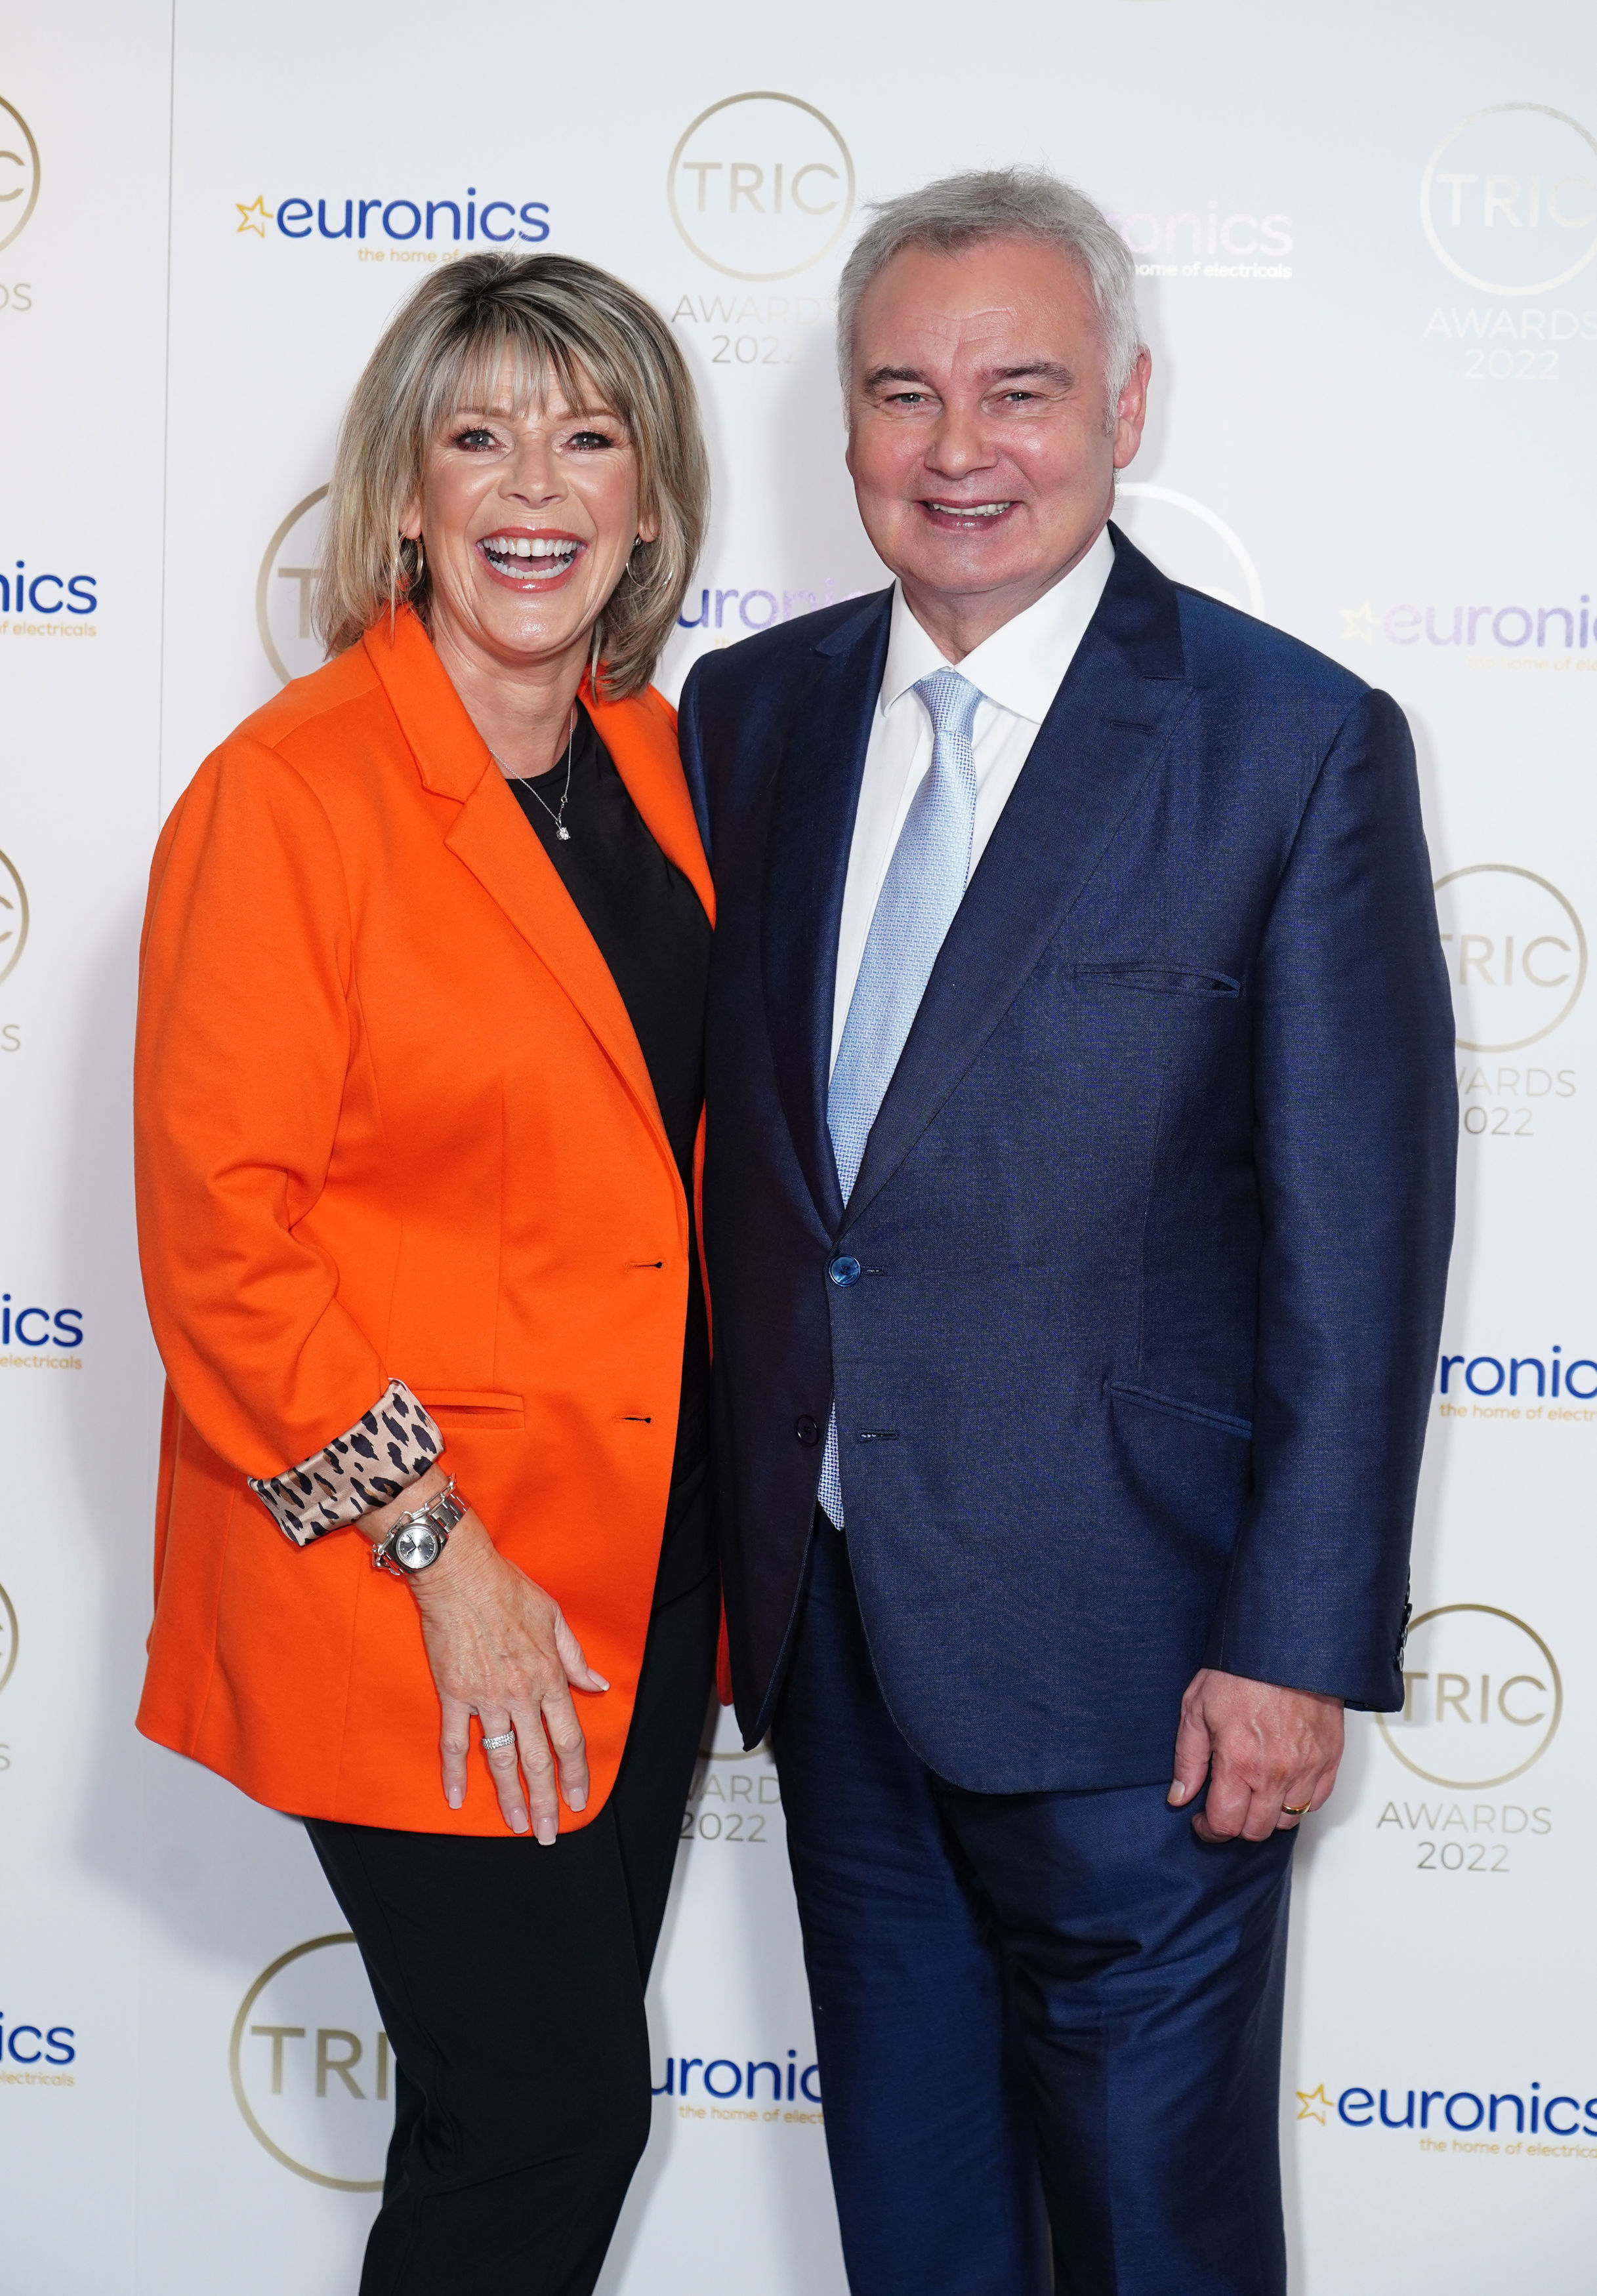 Ruth and Eamonn have announced their split after 14 years of marriage